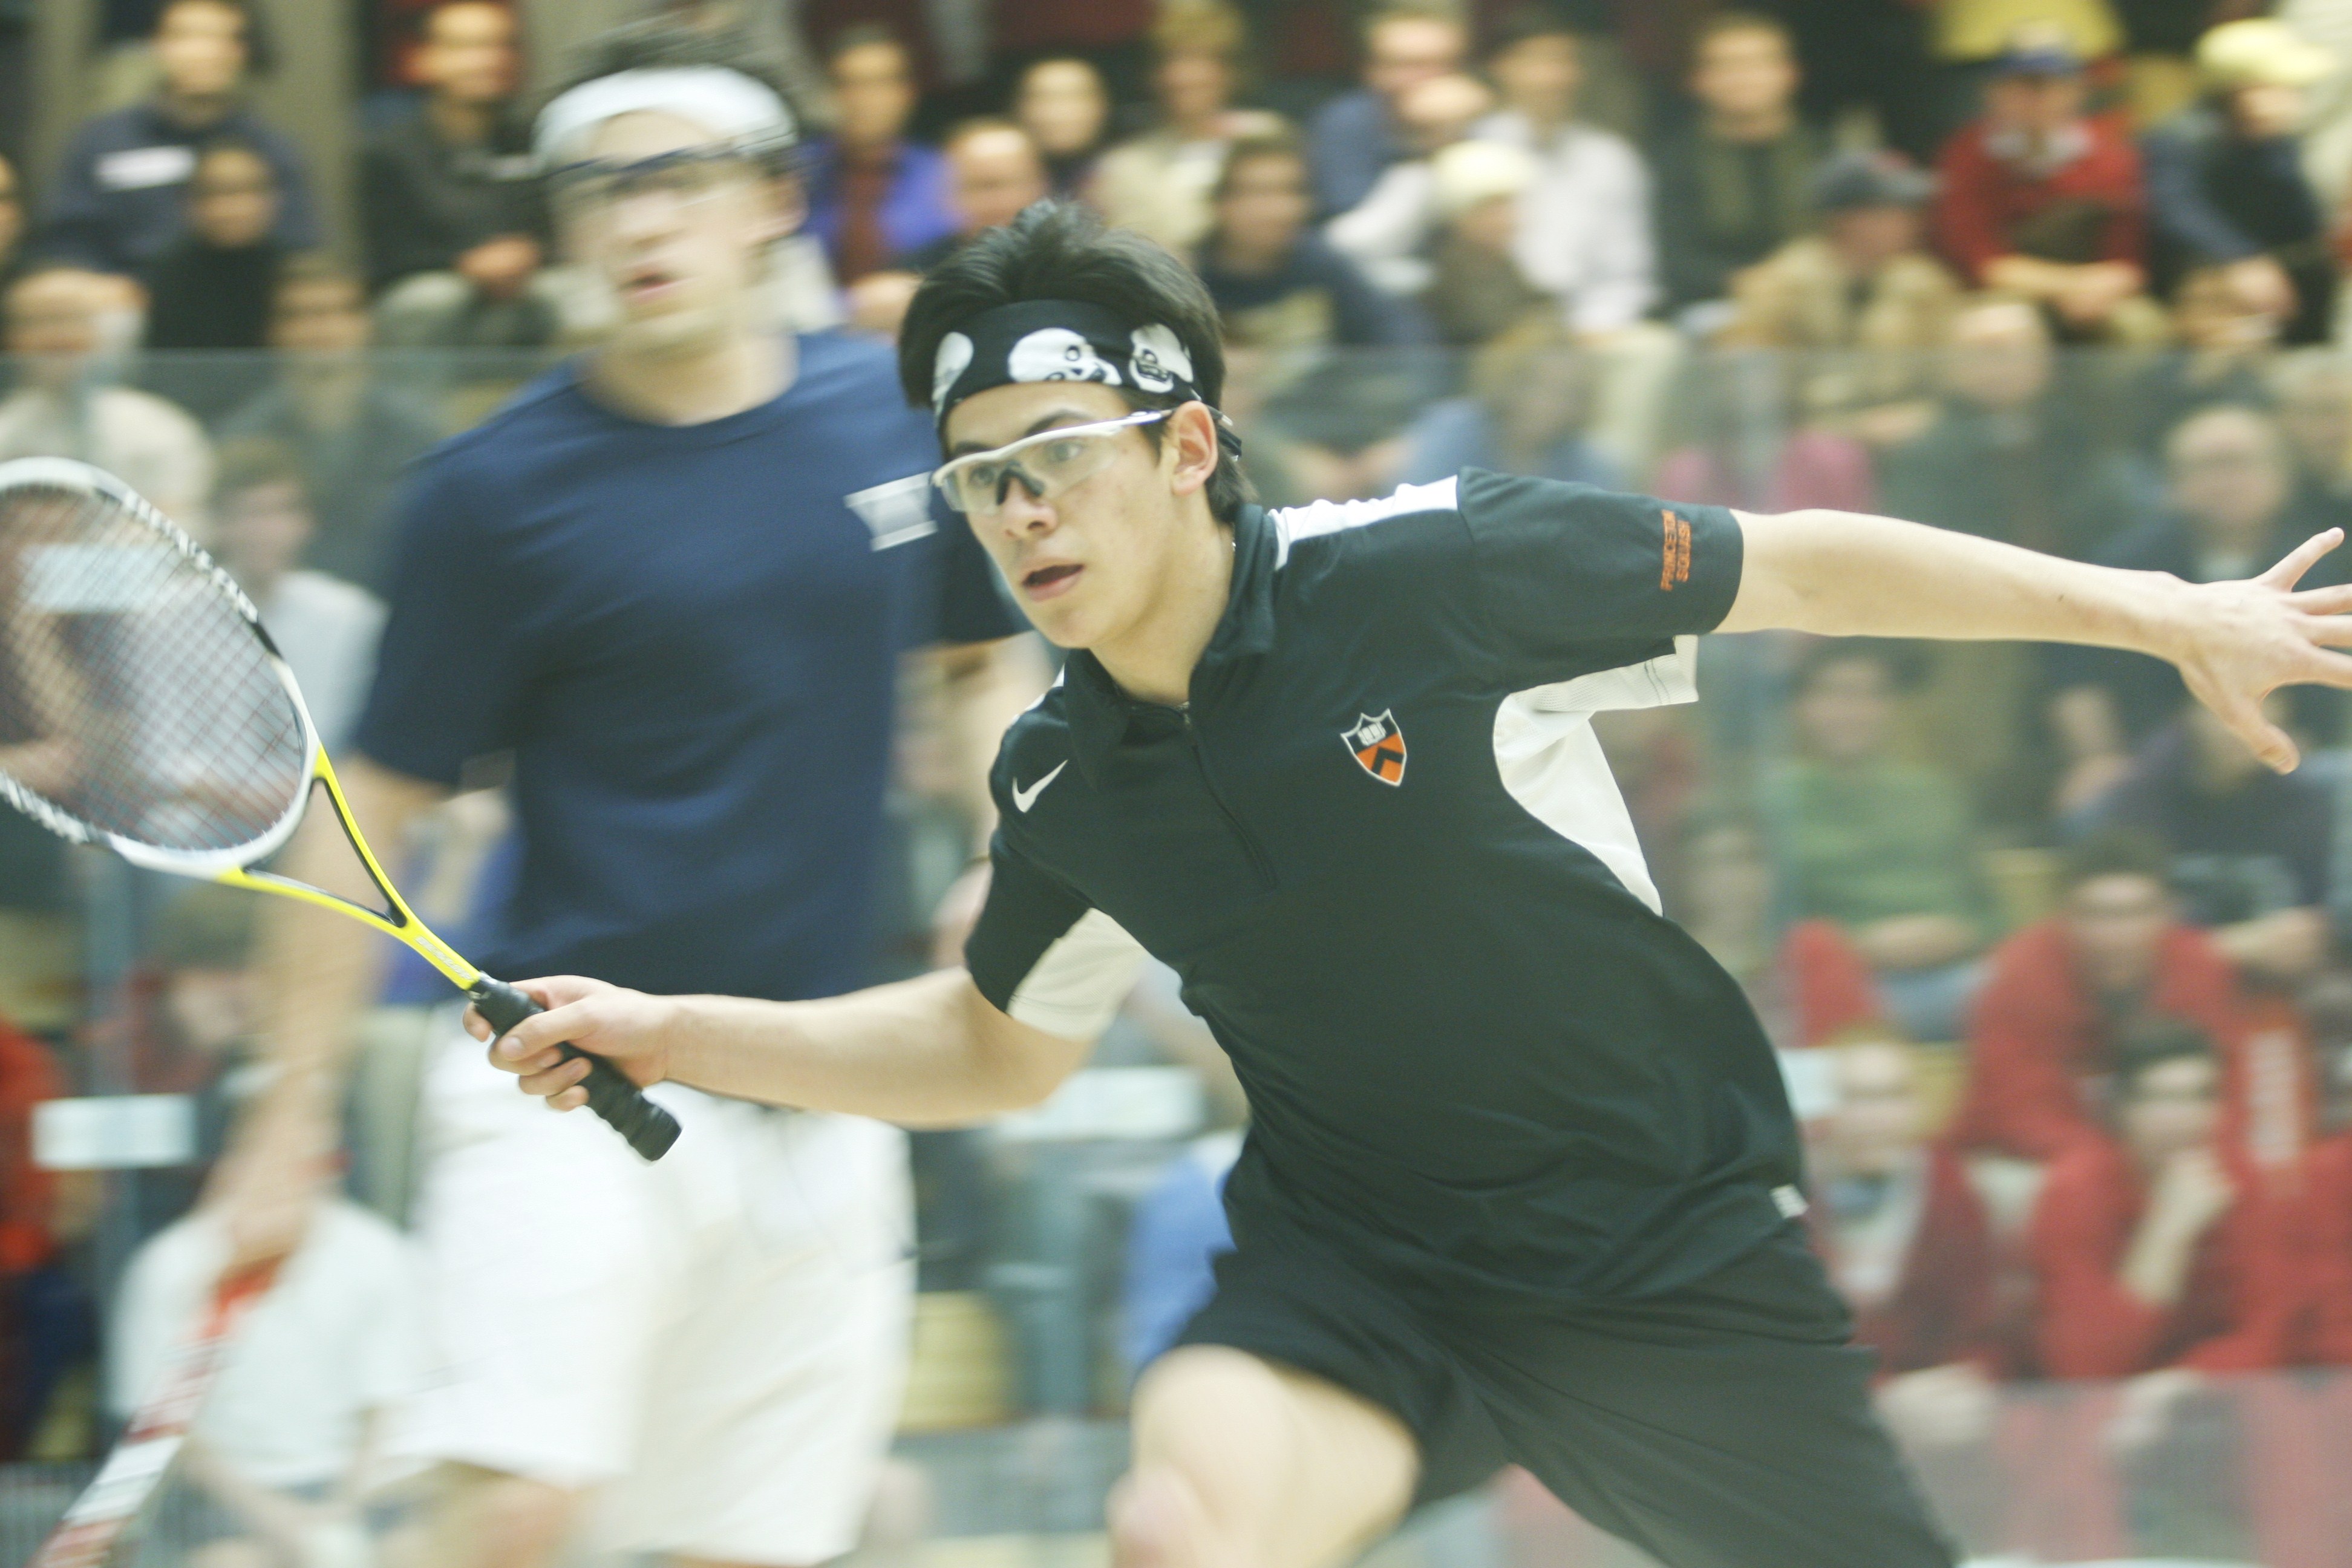 Mauricio Sanchez, who is about to enter his senior season at Princeton, finished the season at the top of the U23 class.